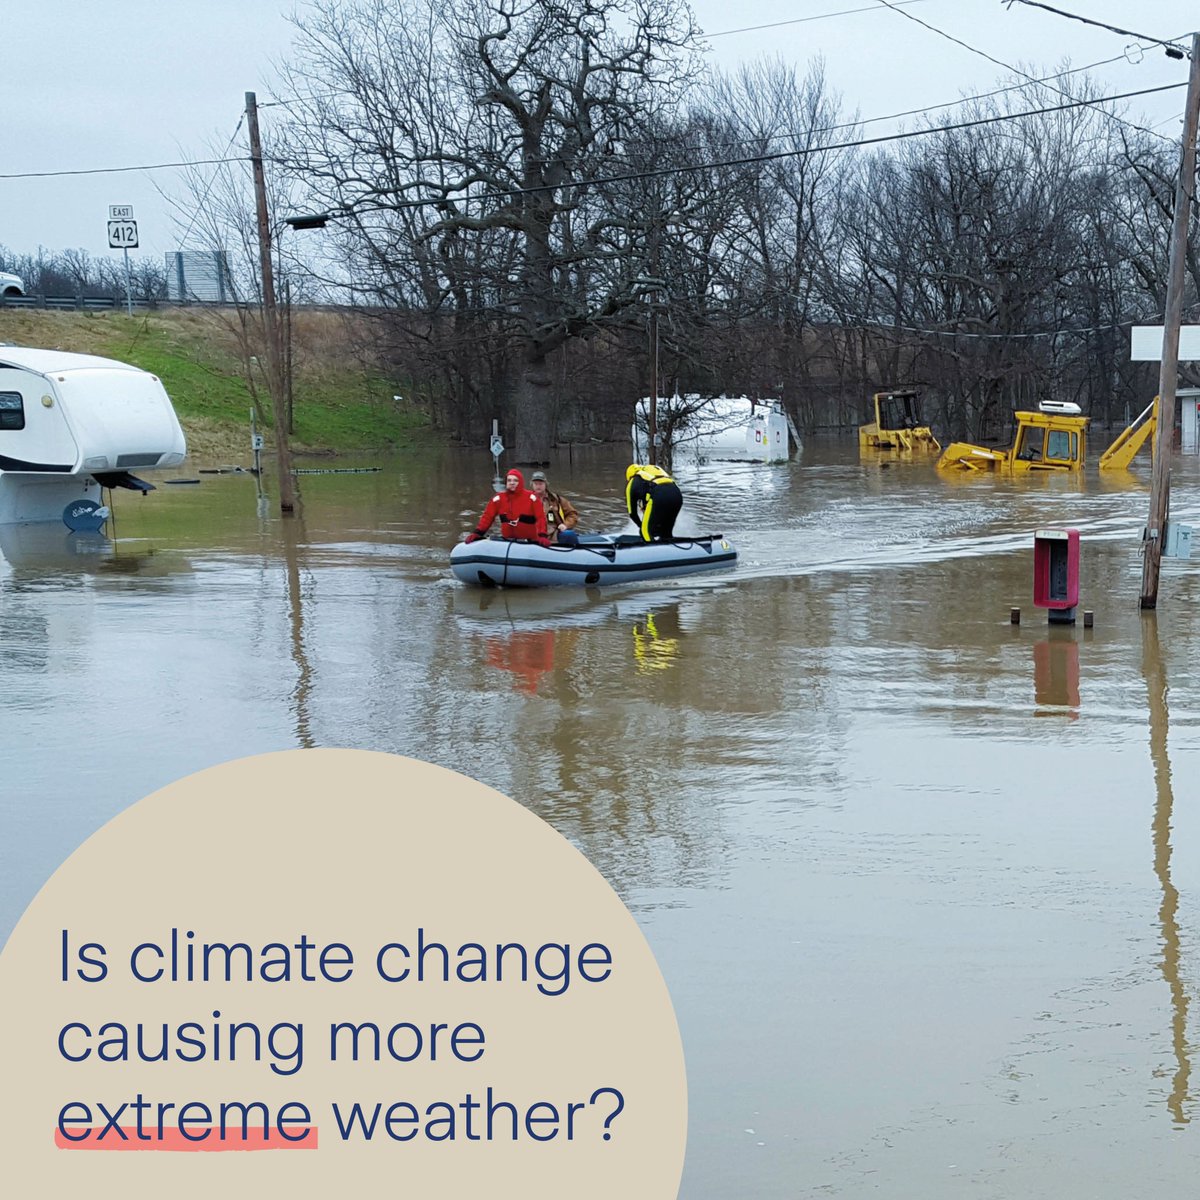 Discover how global warming intensifies hurricanes, floods, droughts, and wildfires. Explore the link between climate change and recent floods worldwide while seeking pathways to resilience ➡️ zurich.io/CCnatural #ClimateRisks #ExtremeWeather